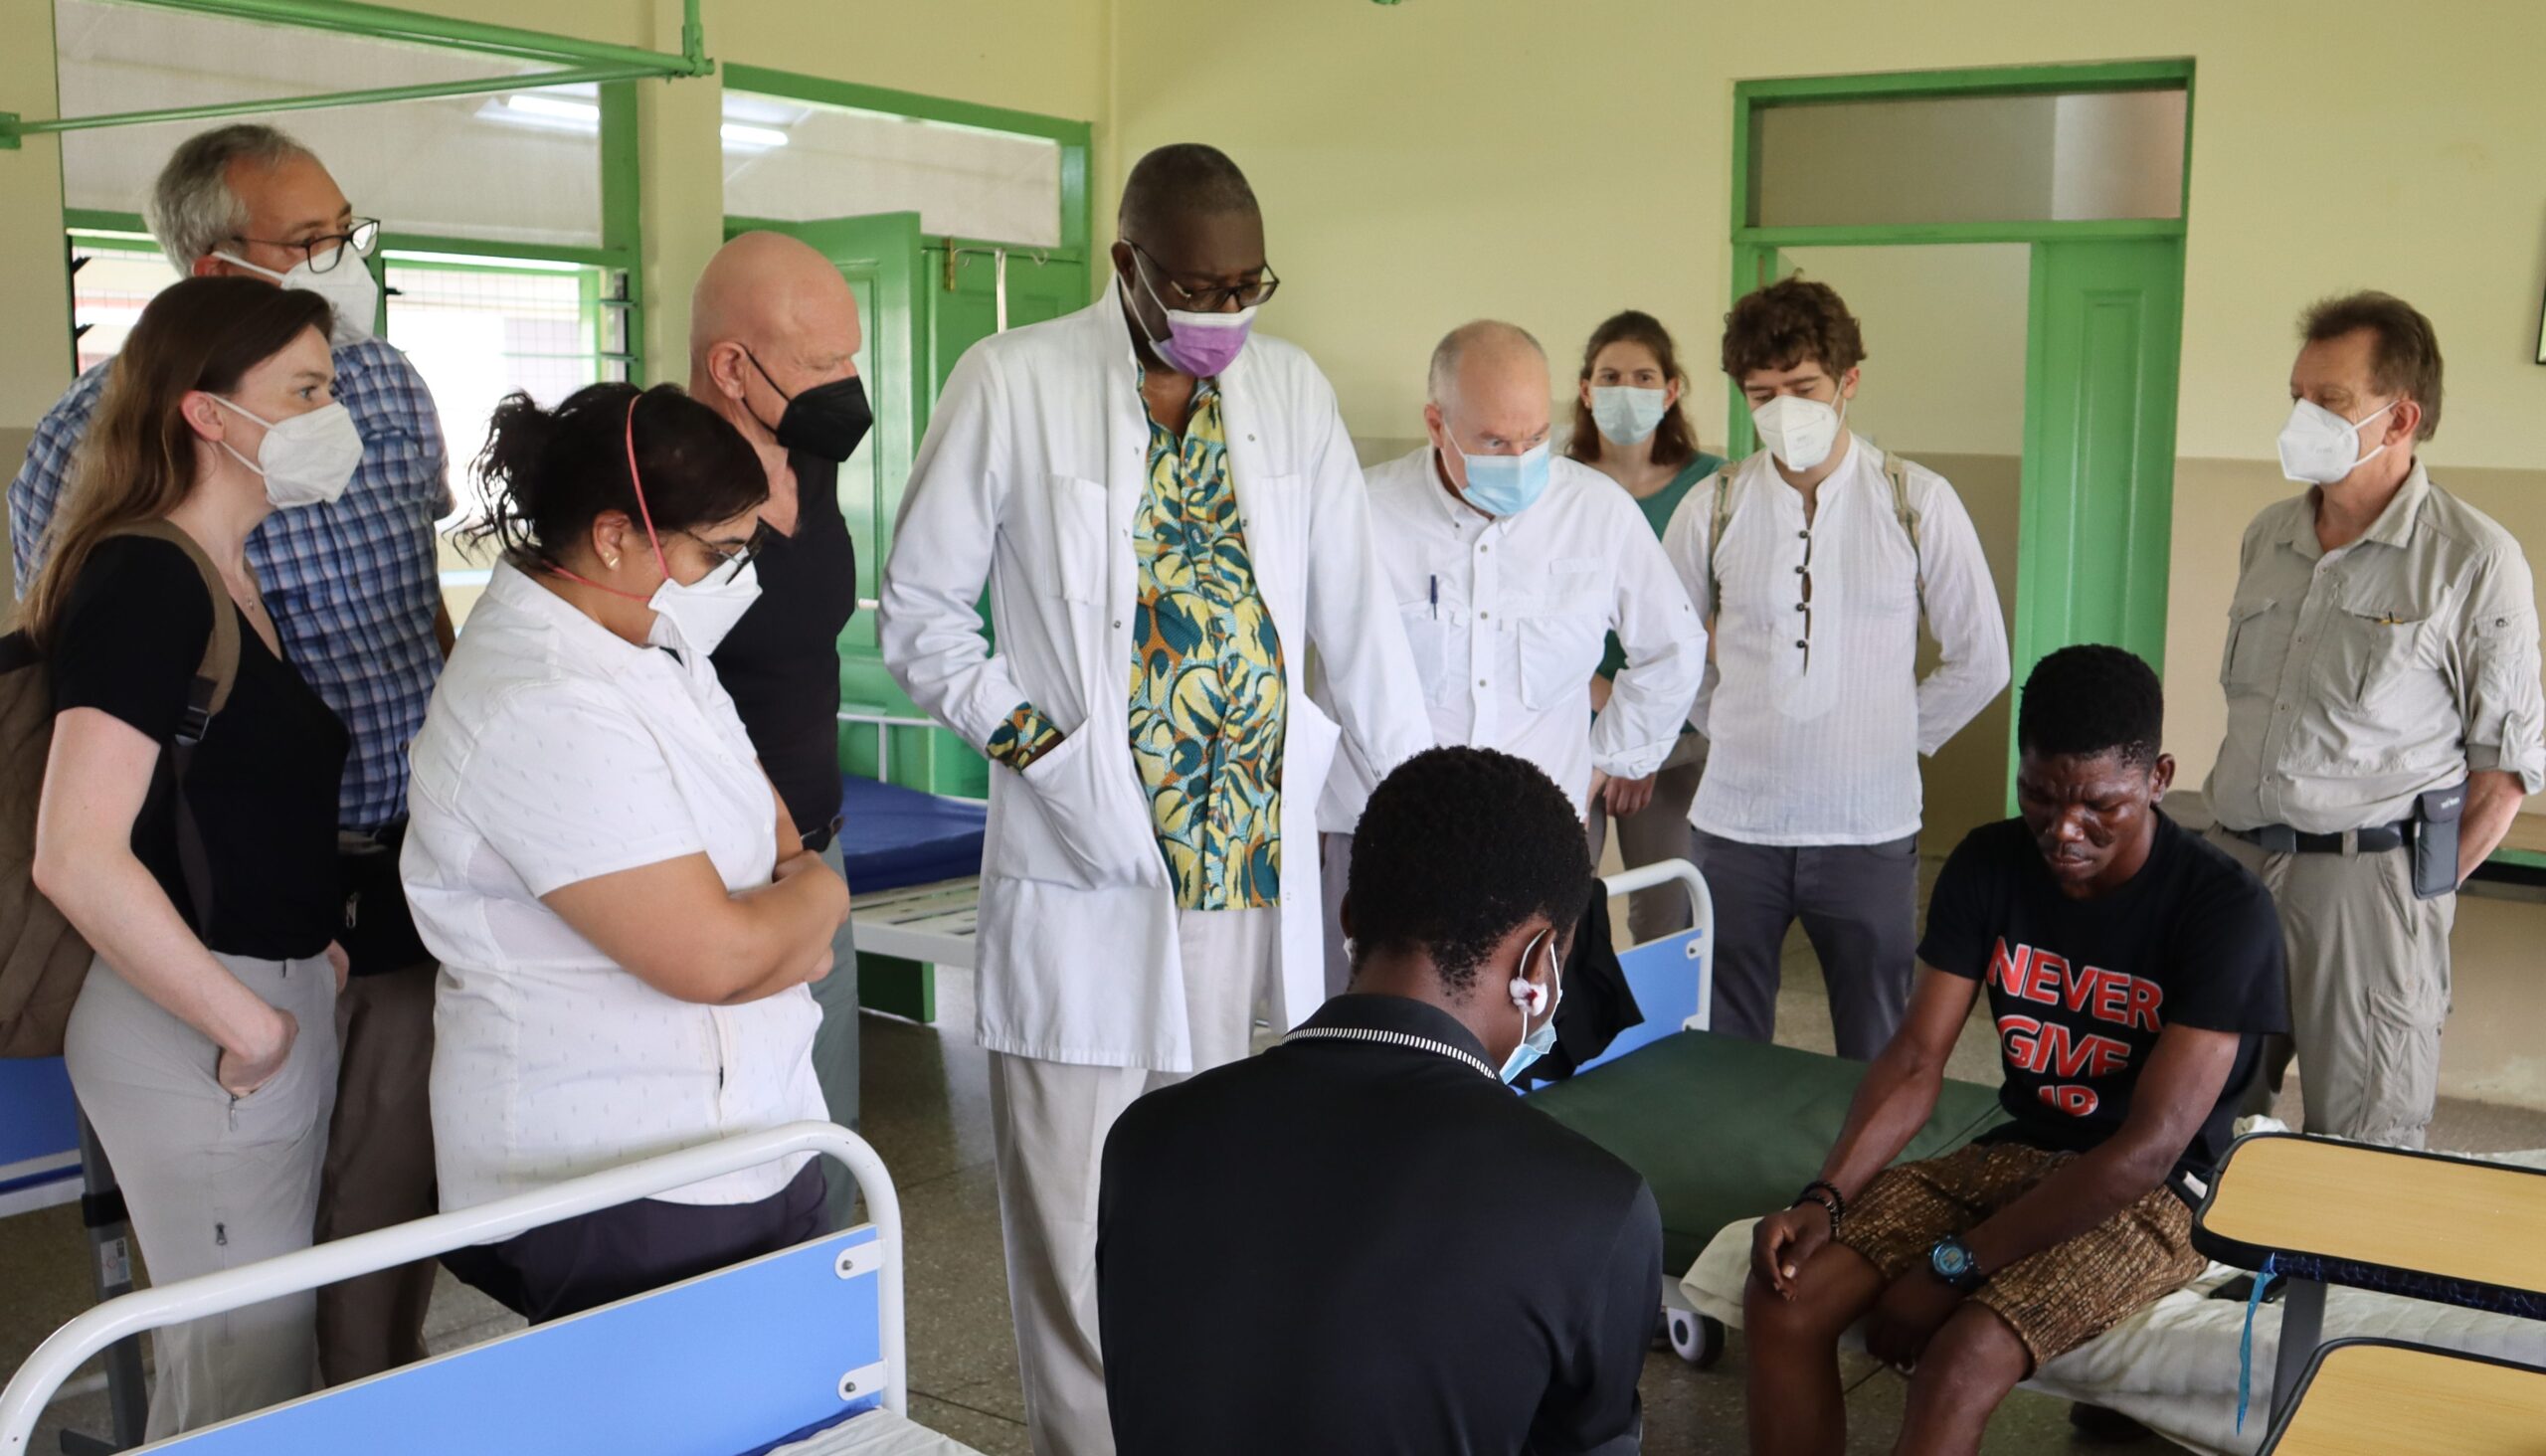 Dr. Otabir, Dr. Schaefer, Dr. Griffin (Parasites Without Borders co-founder and president) & other TROPMEDEX participants on the Leprosy Ward at Ankaful Hospital in Ghana (February 2022)